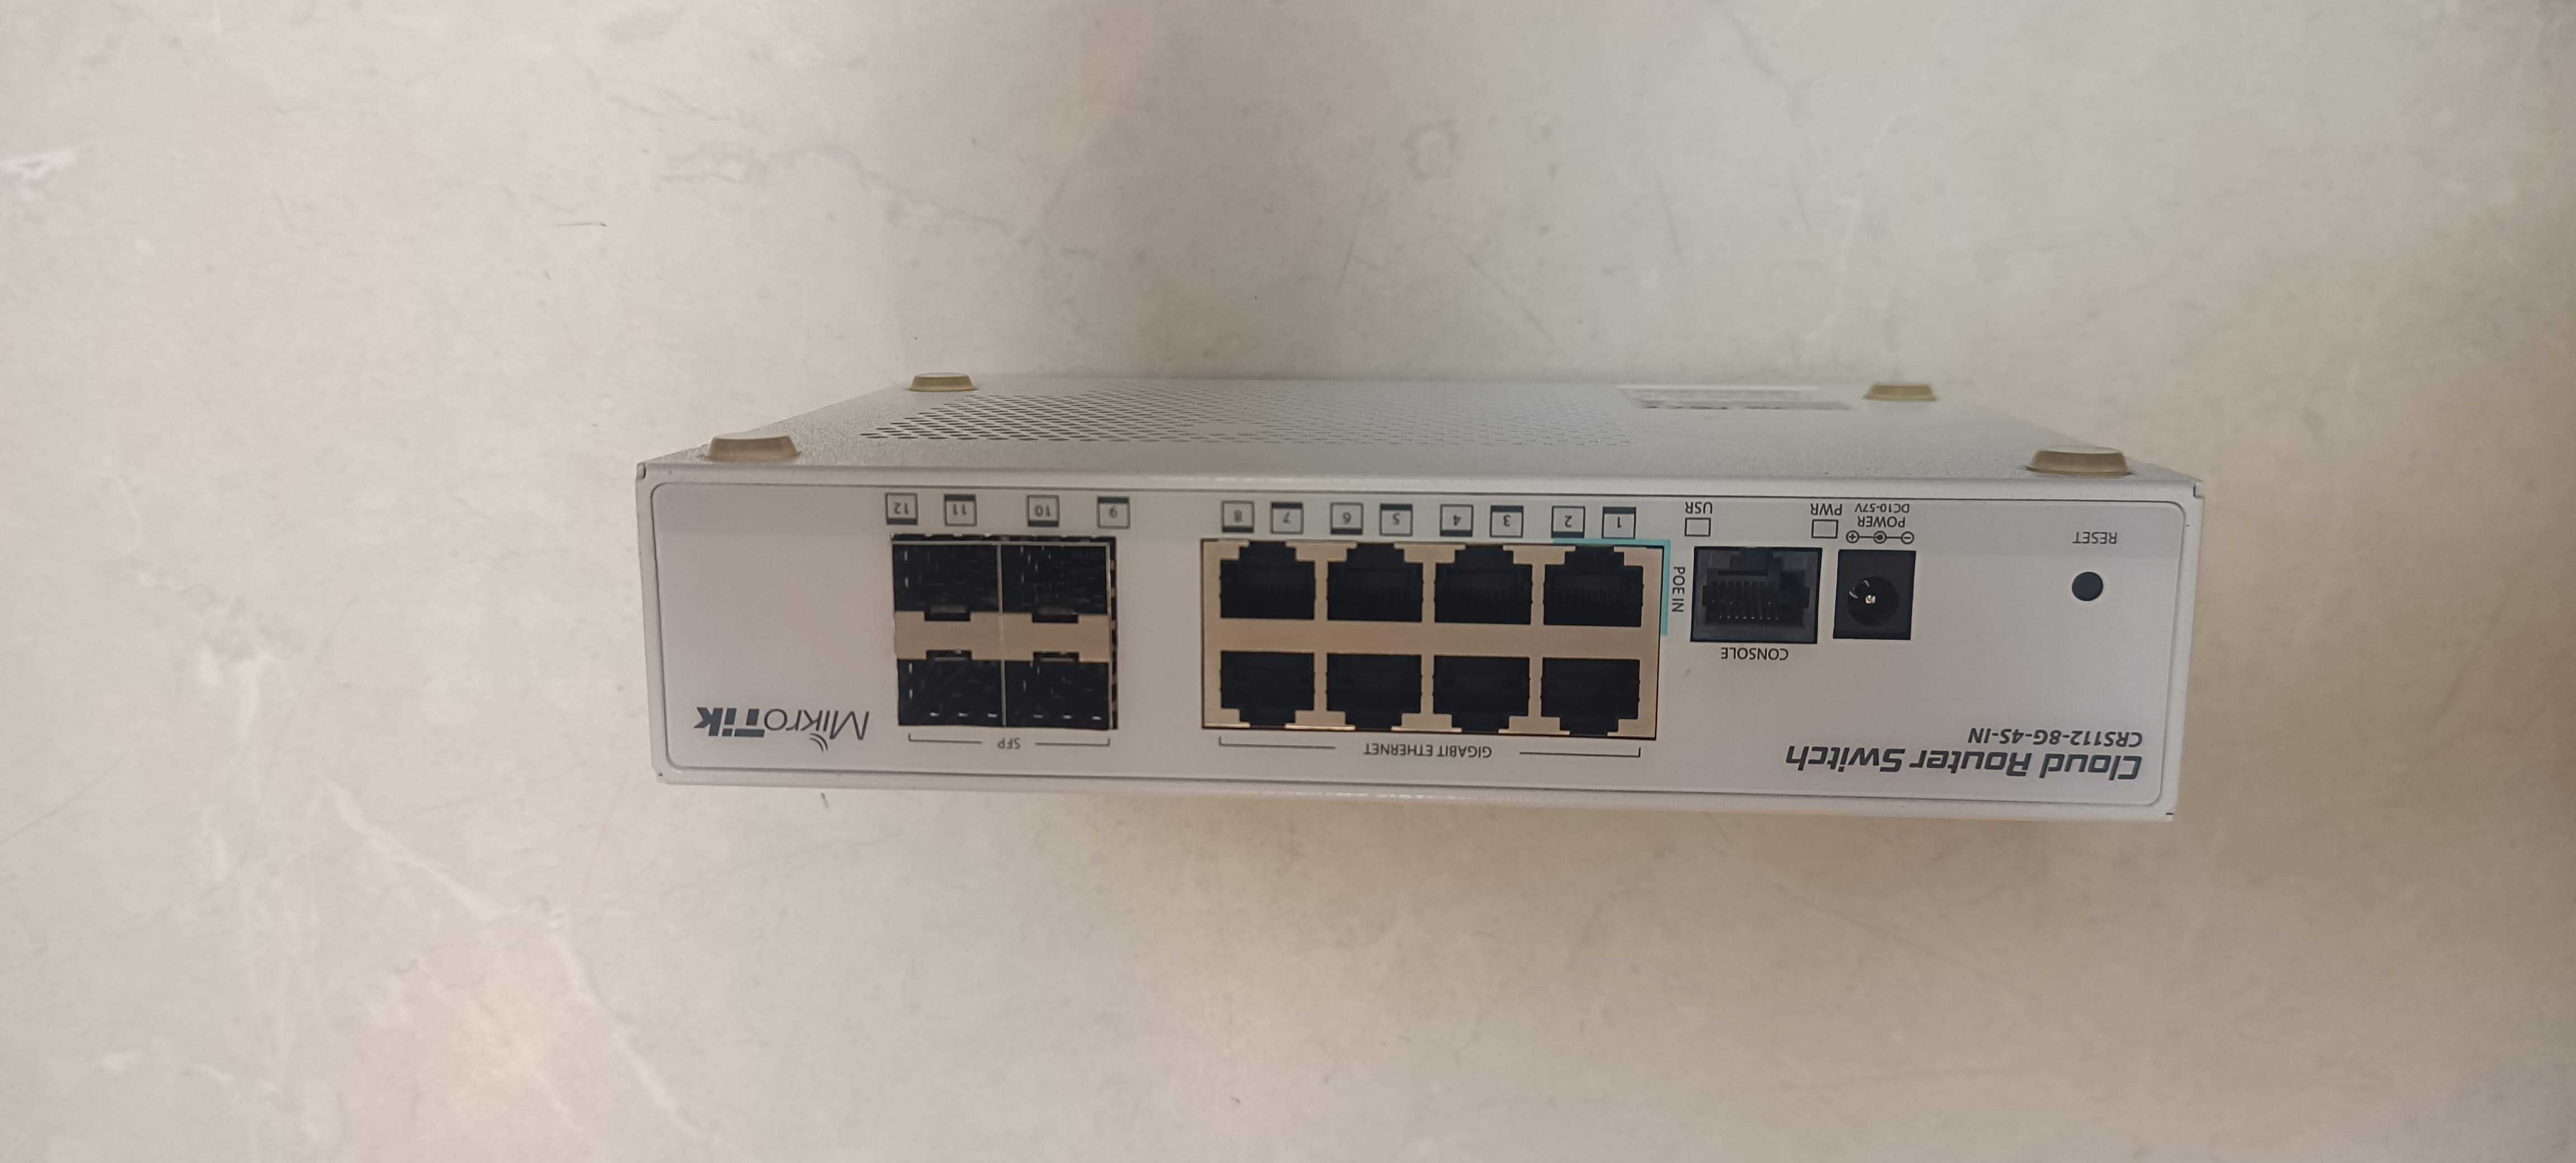 Cloud Router Switch Mikrotik CRS112-8G-4S-IN